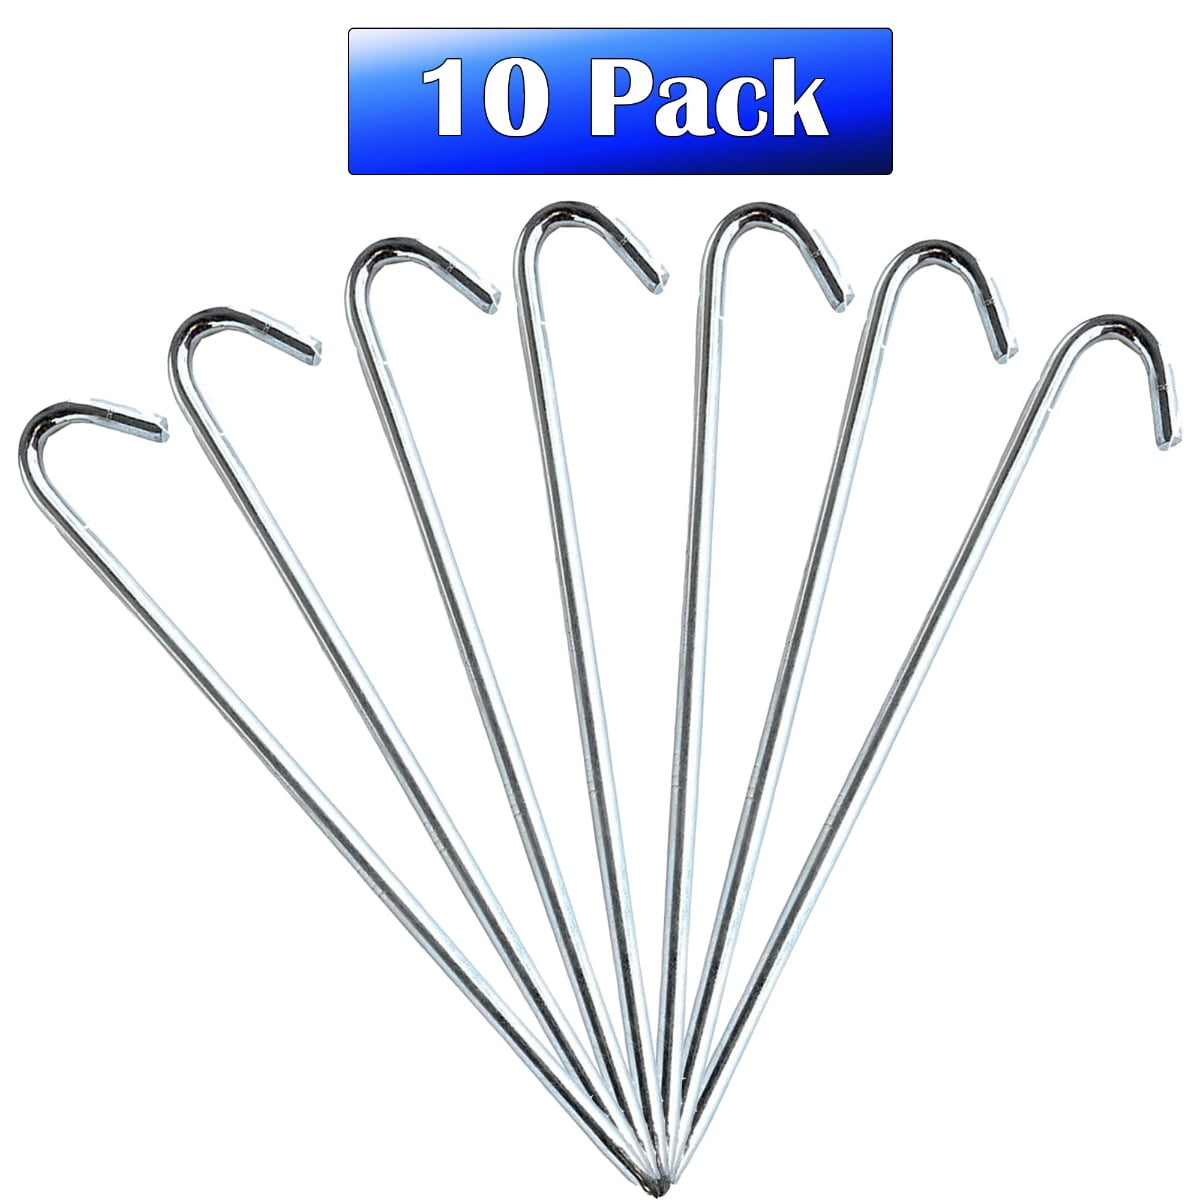 Heavy Duty Steel Tent Stakes Inflatable Camping Canopy Landscaping Peg Hook LOT 